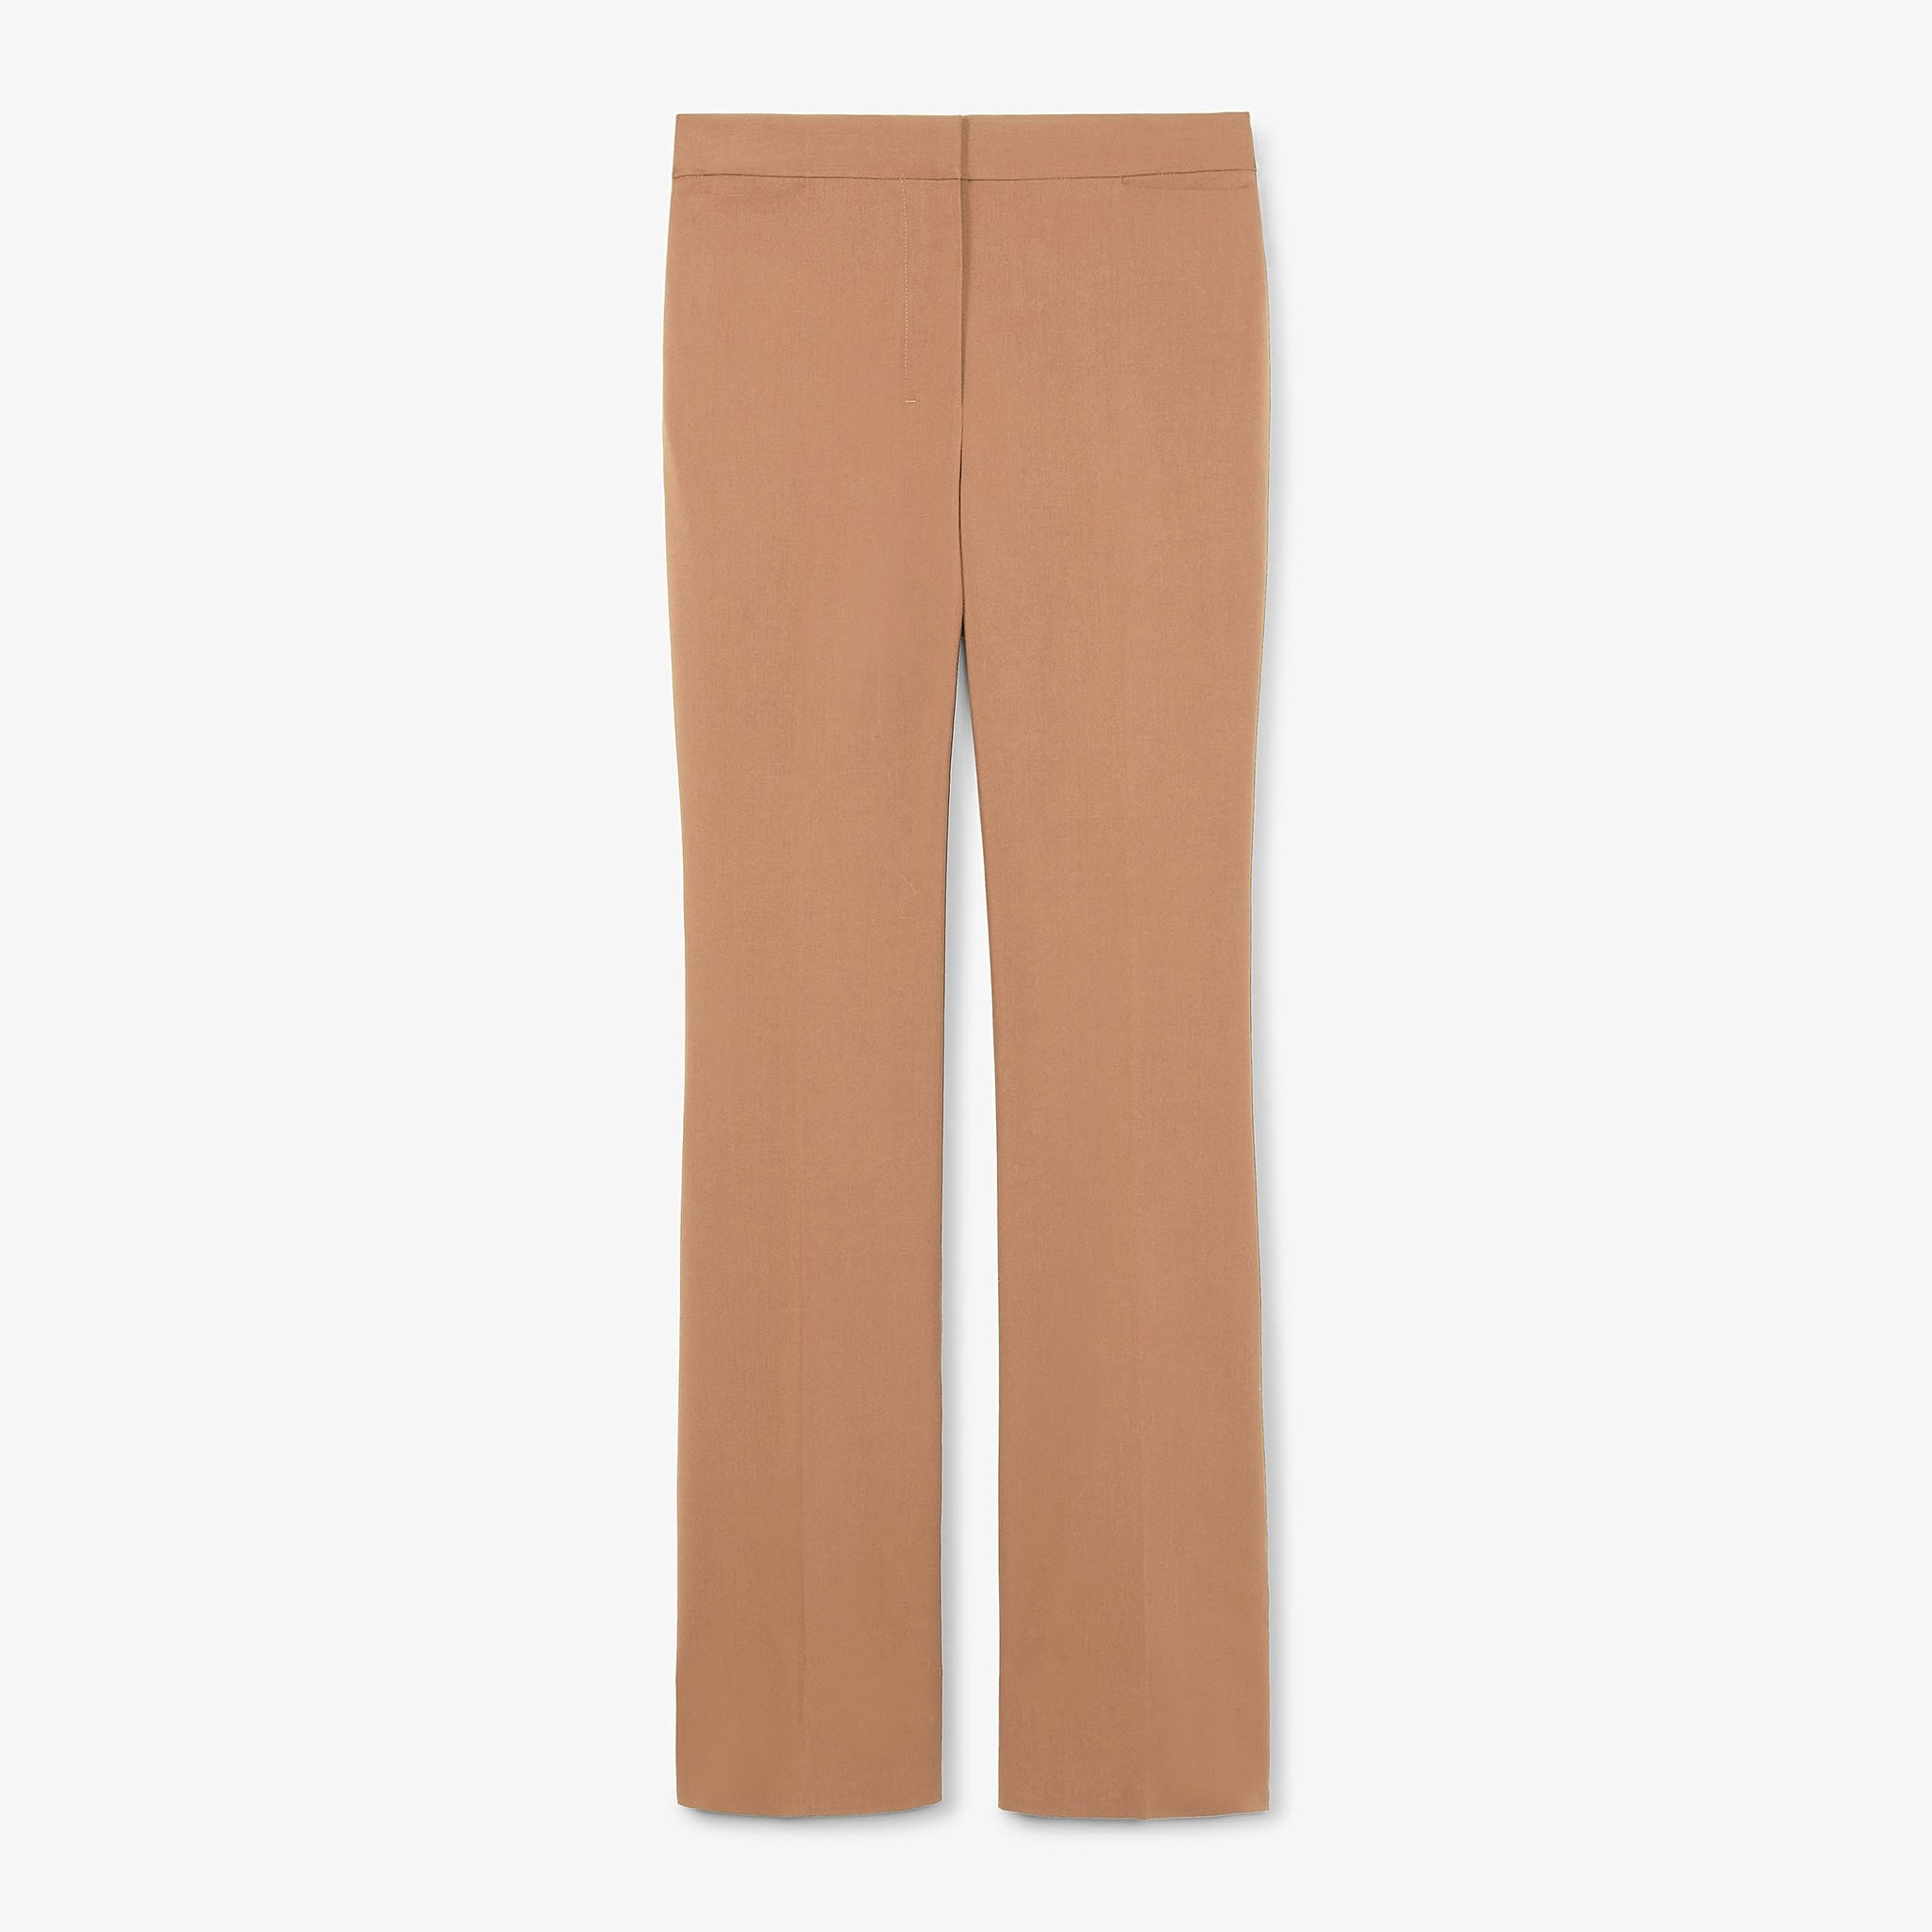 Packshot image of the Horton Pant-Washable Wool Twill in camel